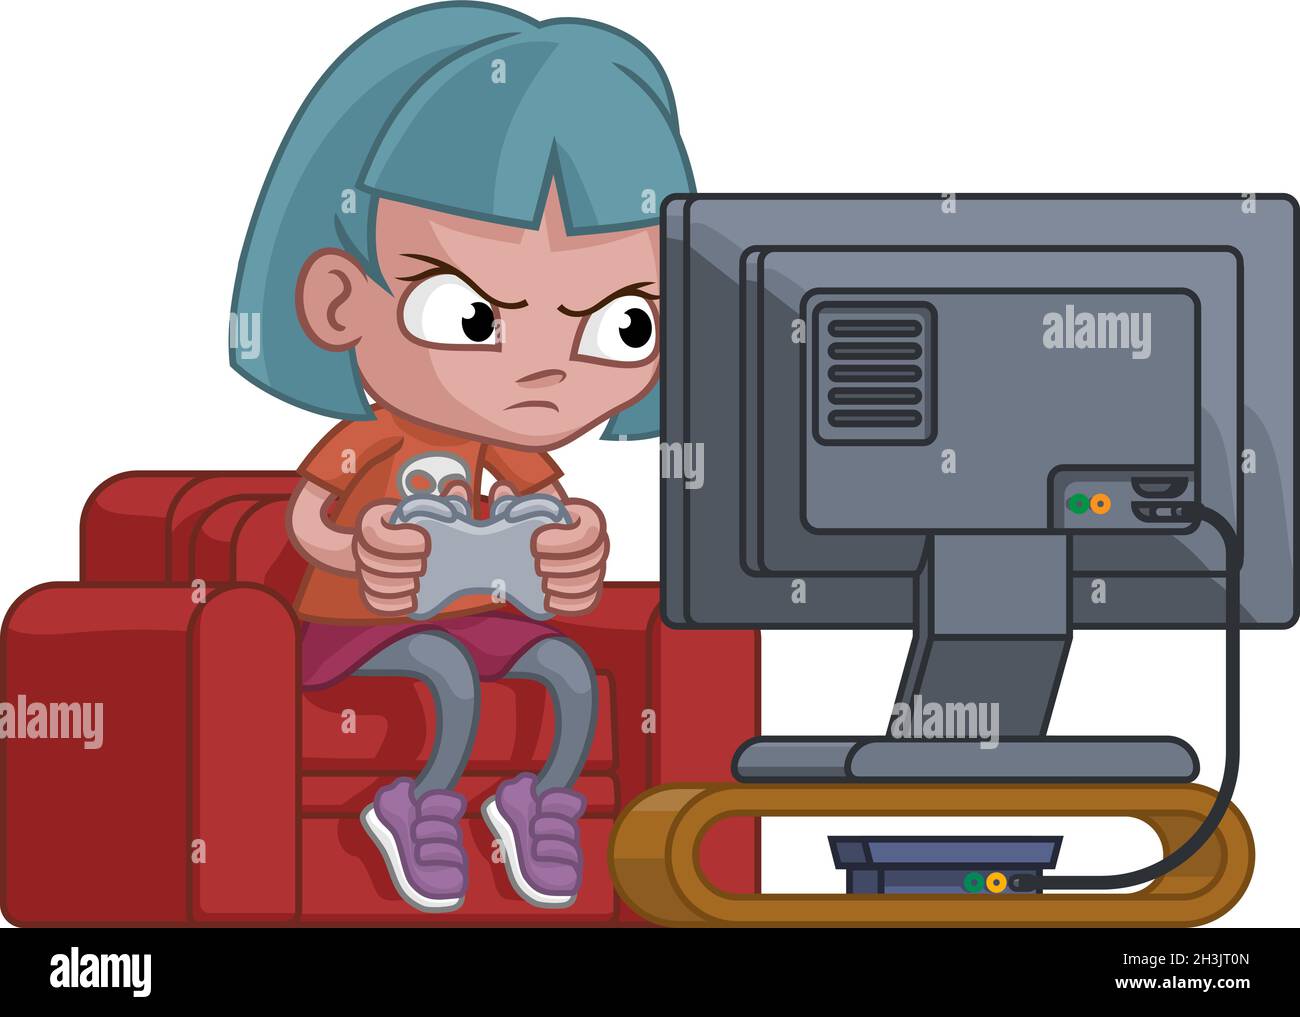 Kid Girl Gamer Playing Video Games Console Cartoon Stock Vector